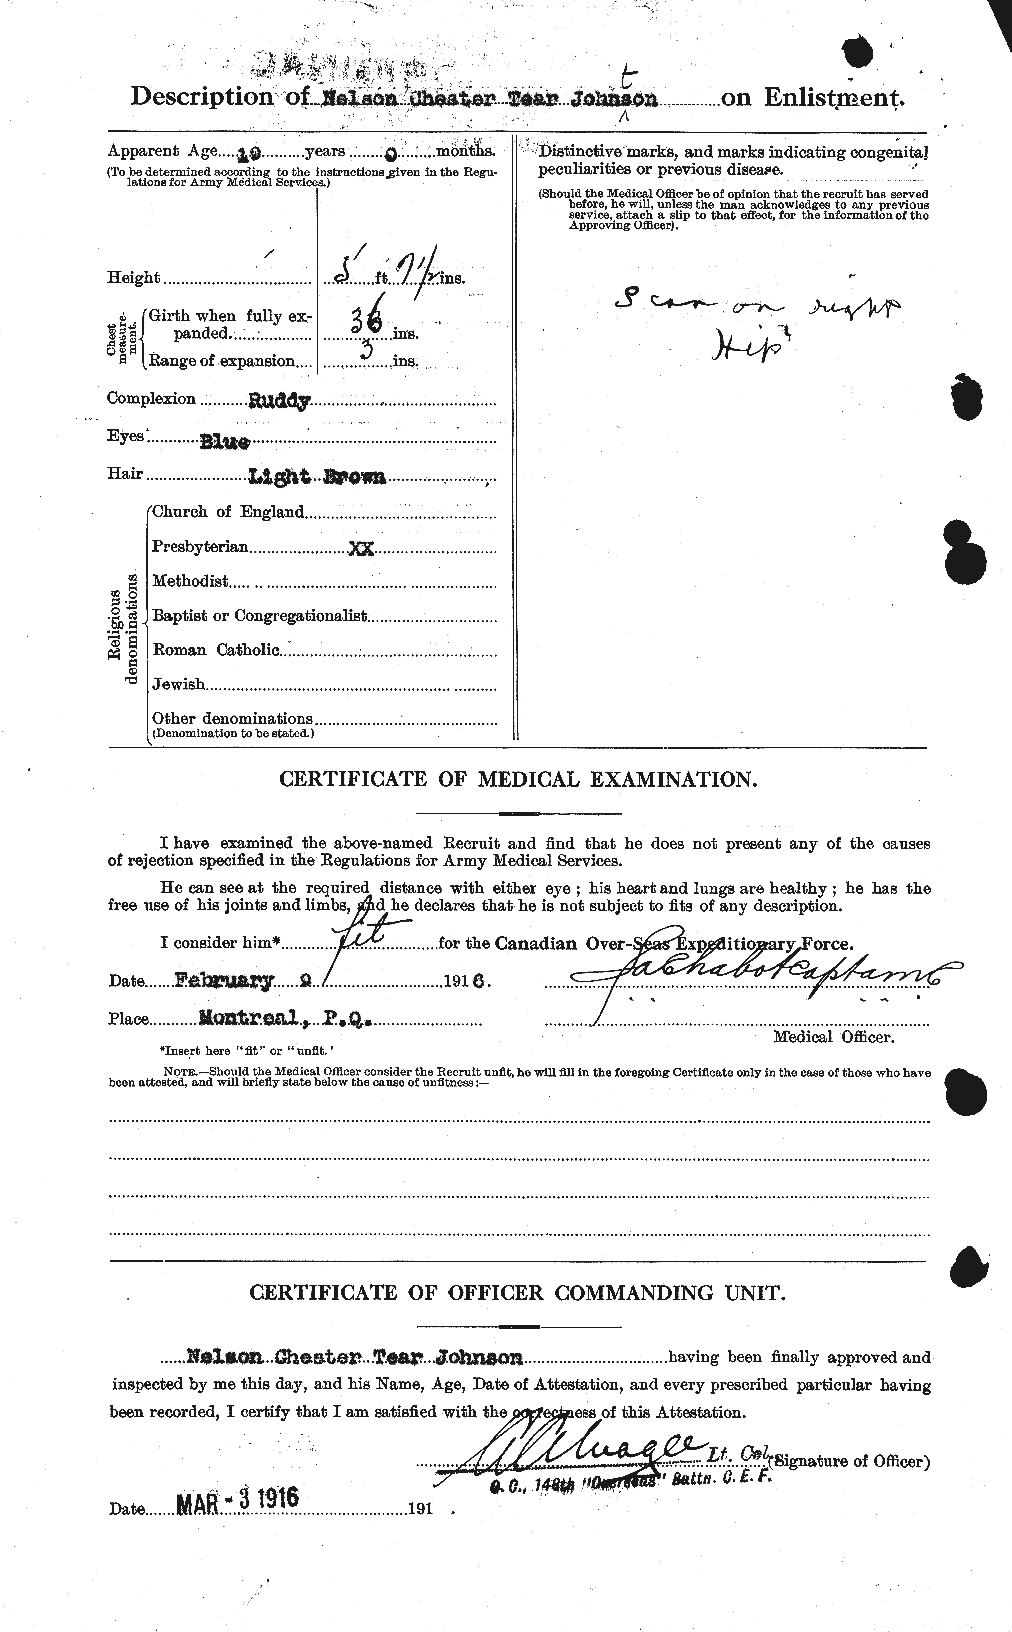 Personnel Records of the First World War - CEF 423000b